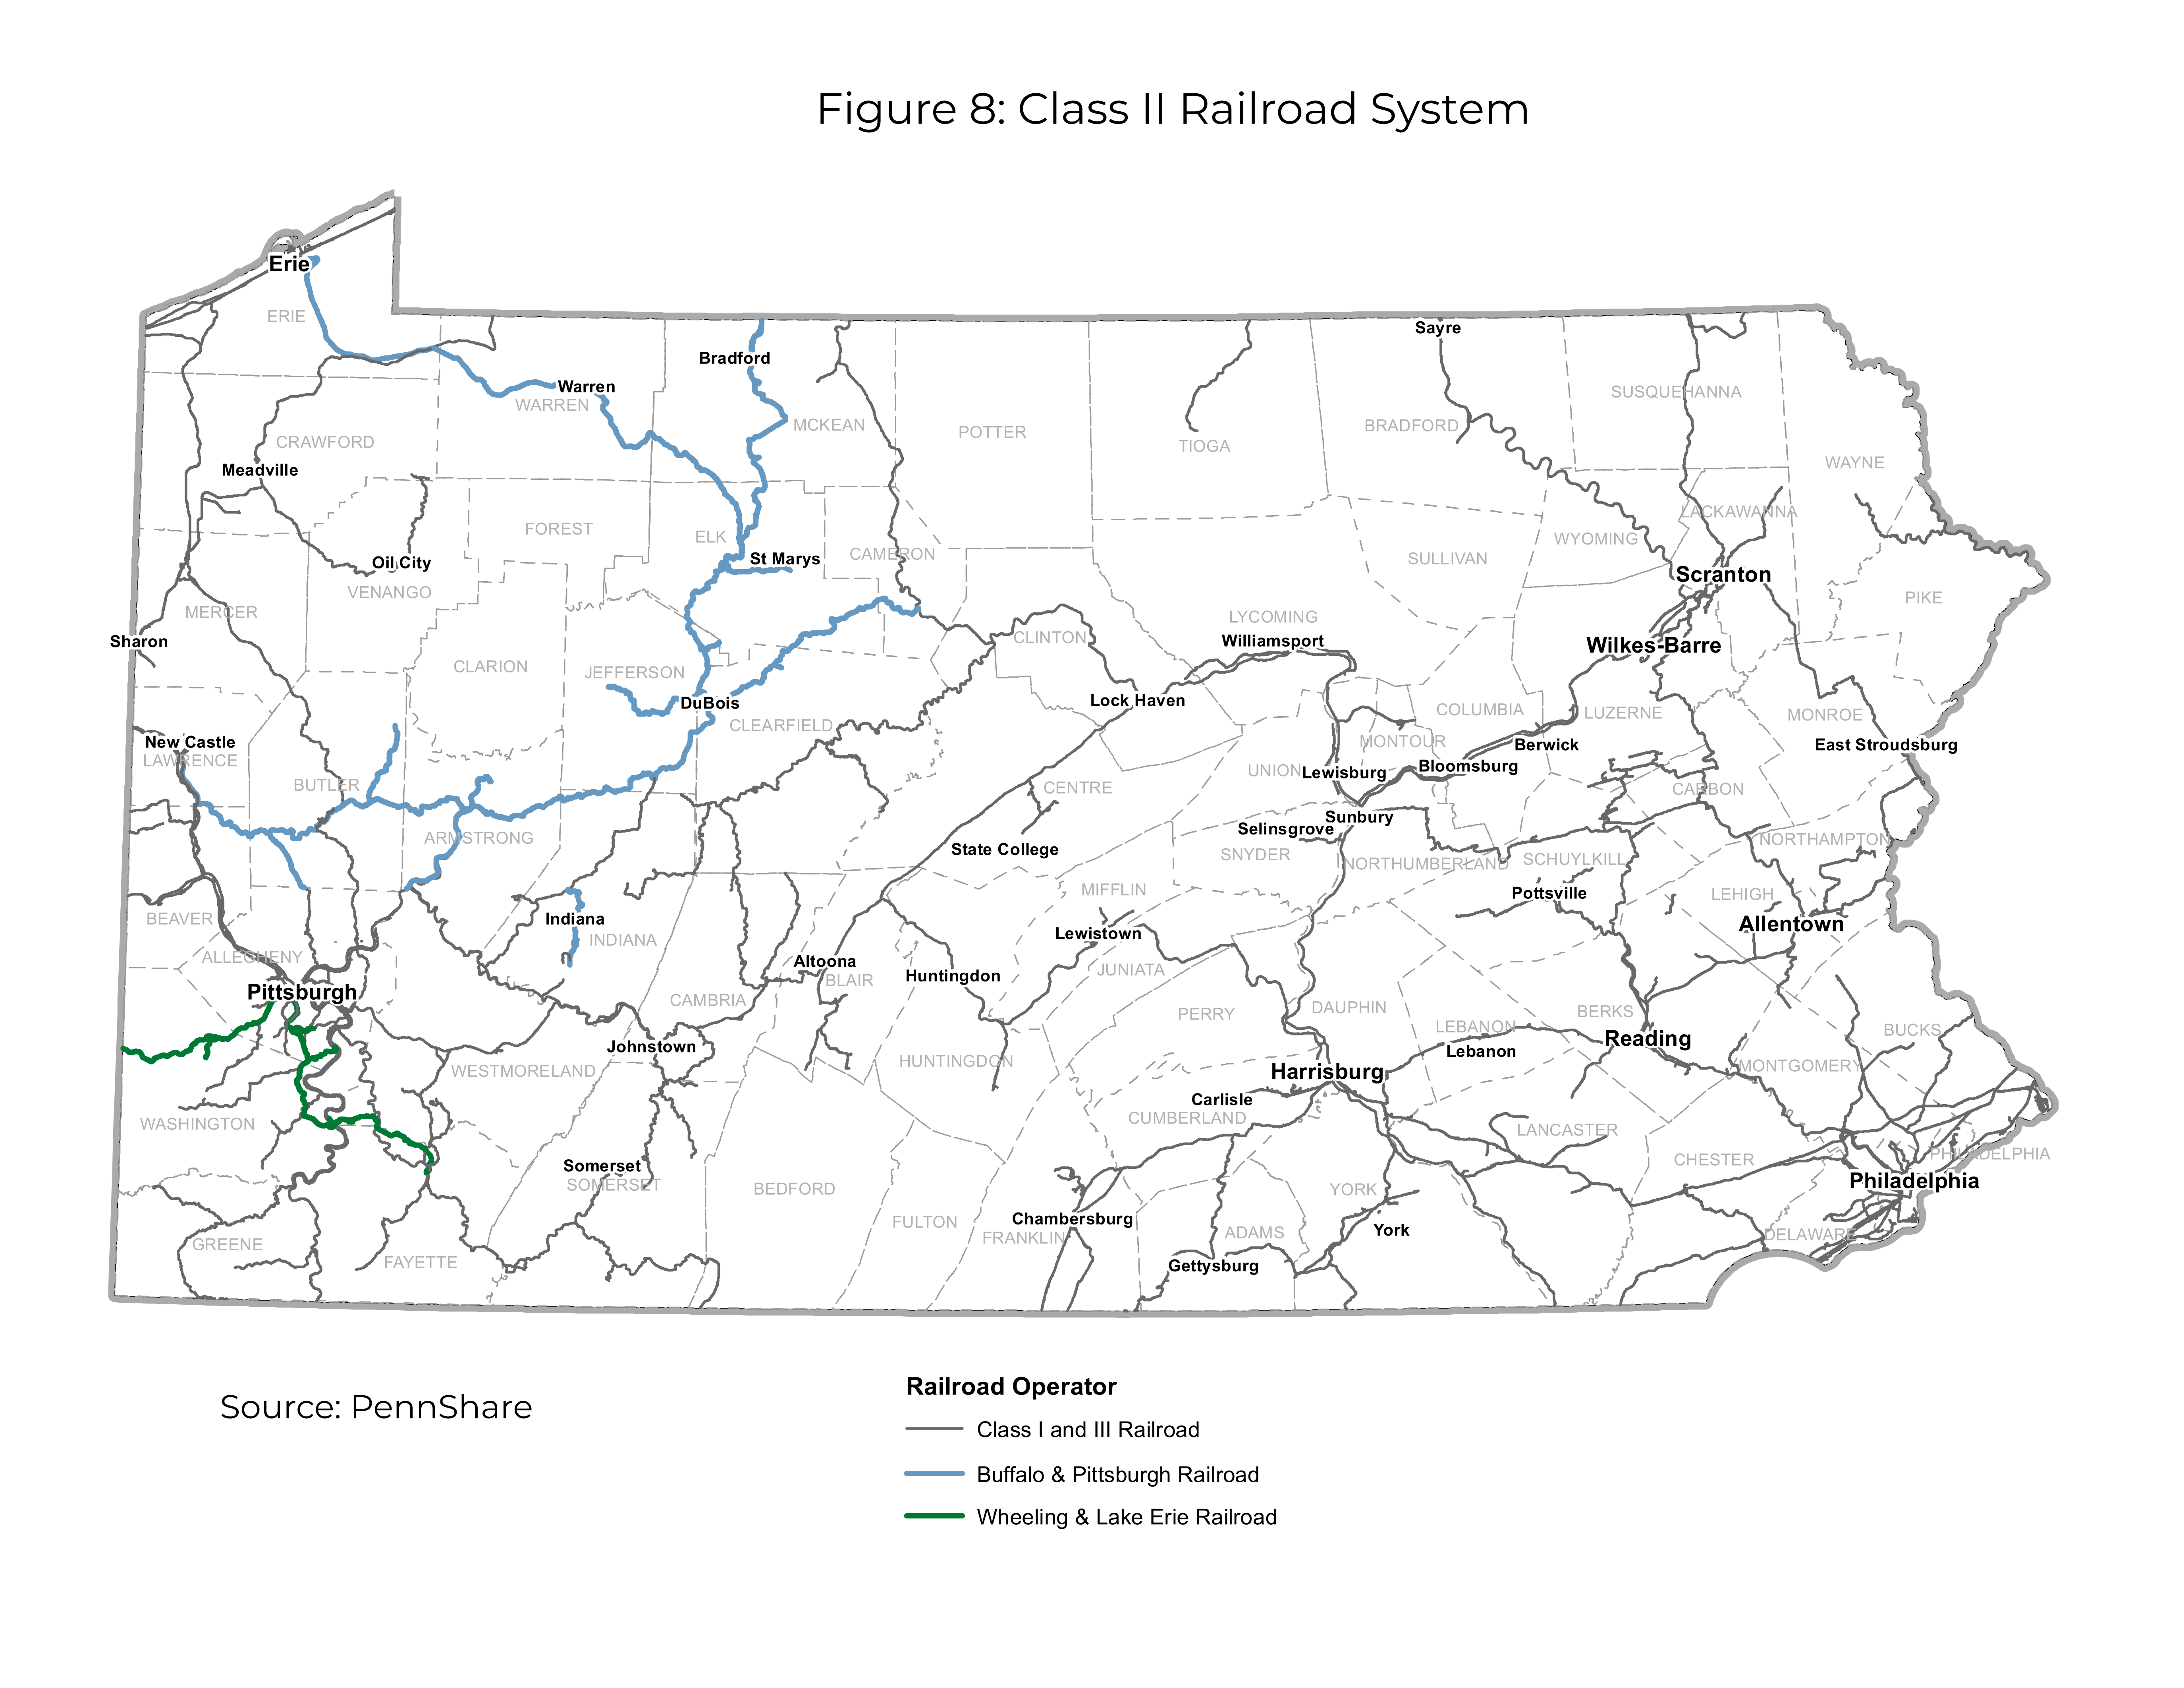 Figure 8 is a state map of Pennsylvania illustrating the state’s Class 2 regional railroad system using blue and green lines.